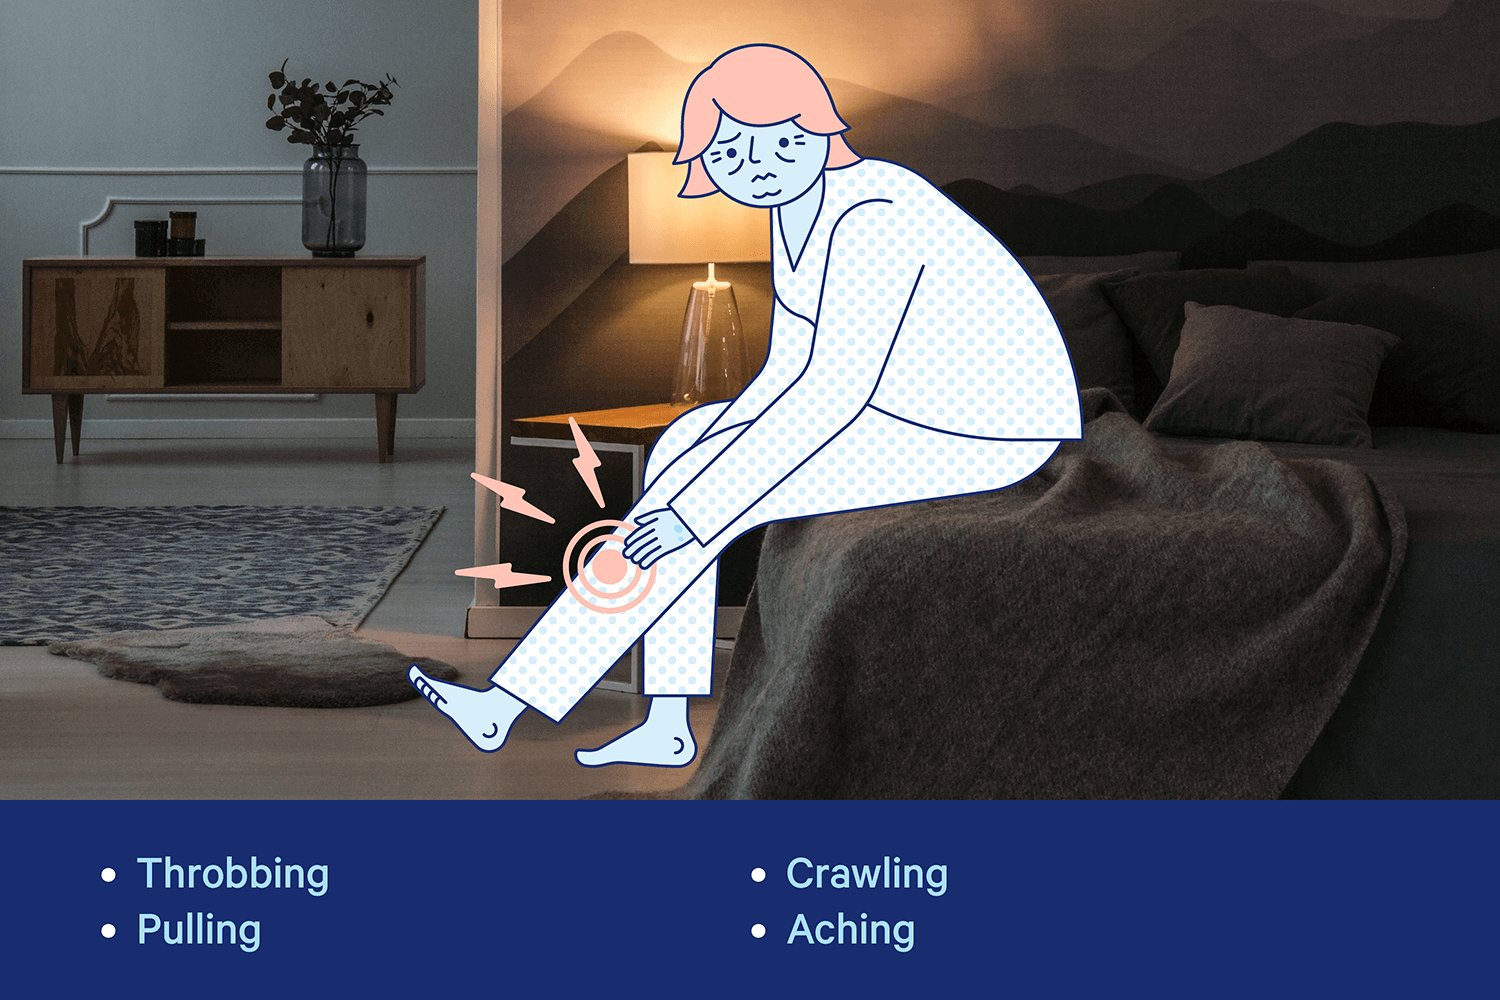 A woman massages her legs in a dimply lit bedroom. Illustration.